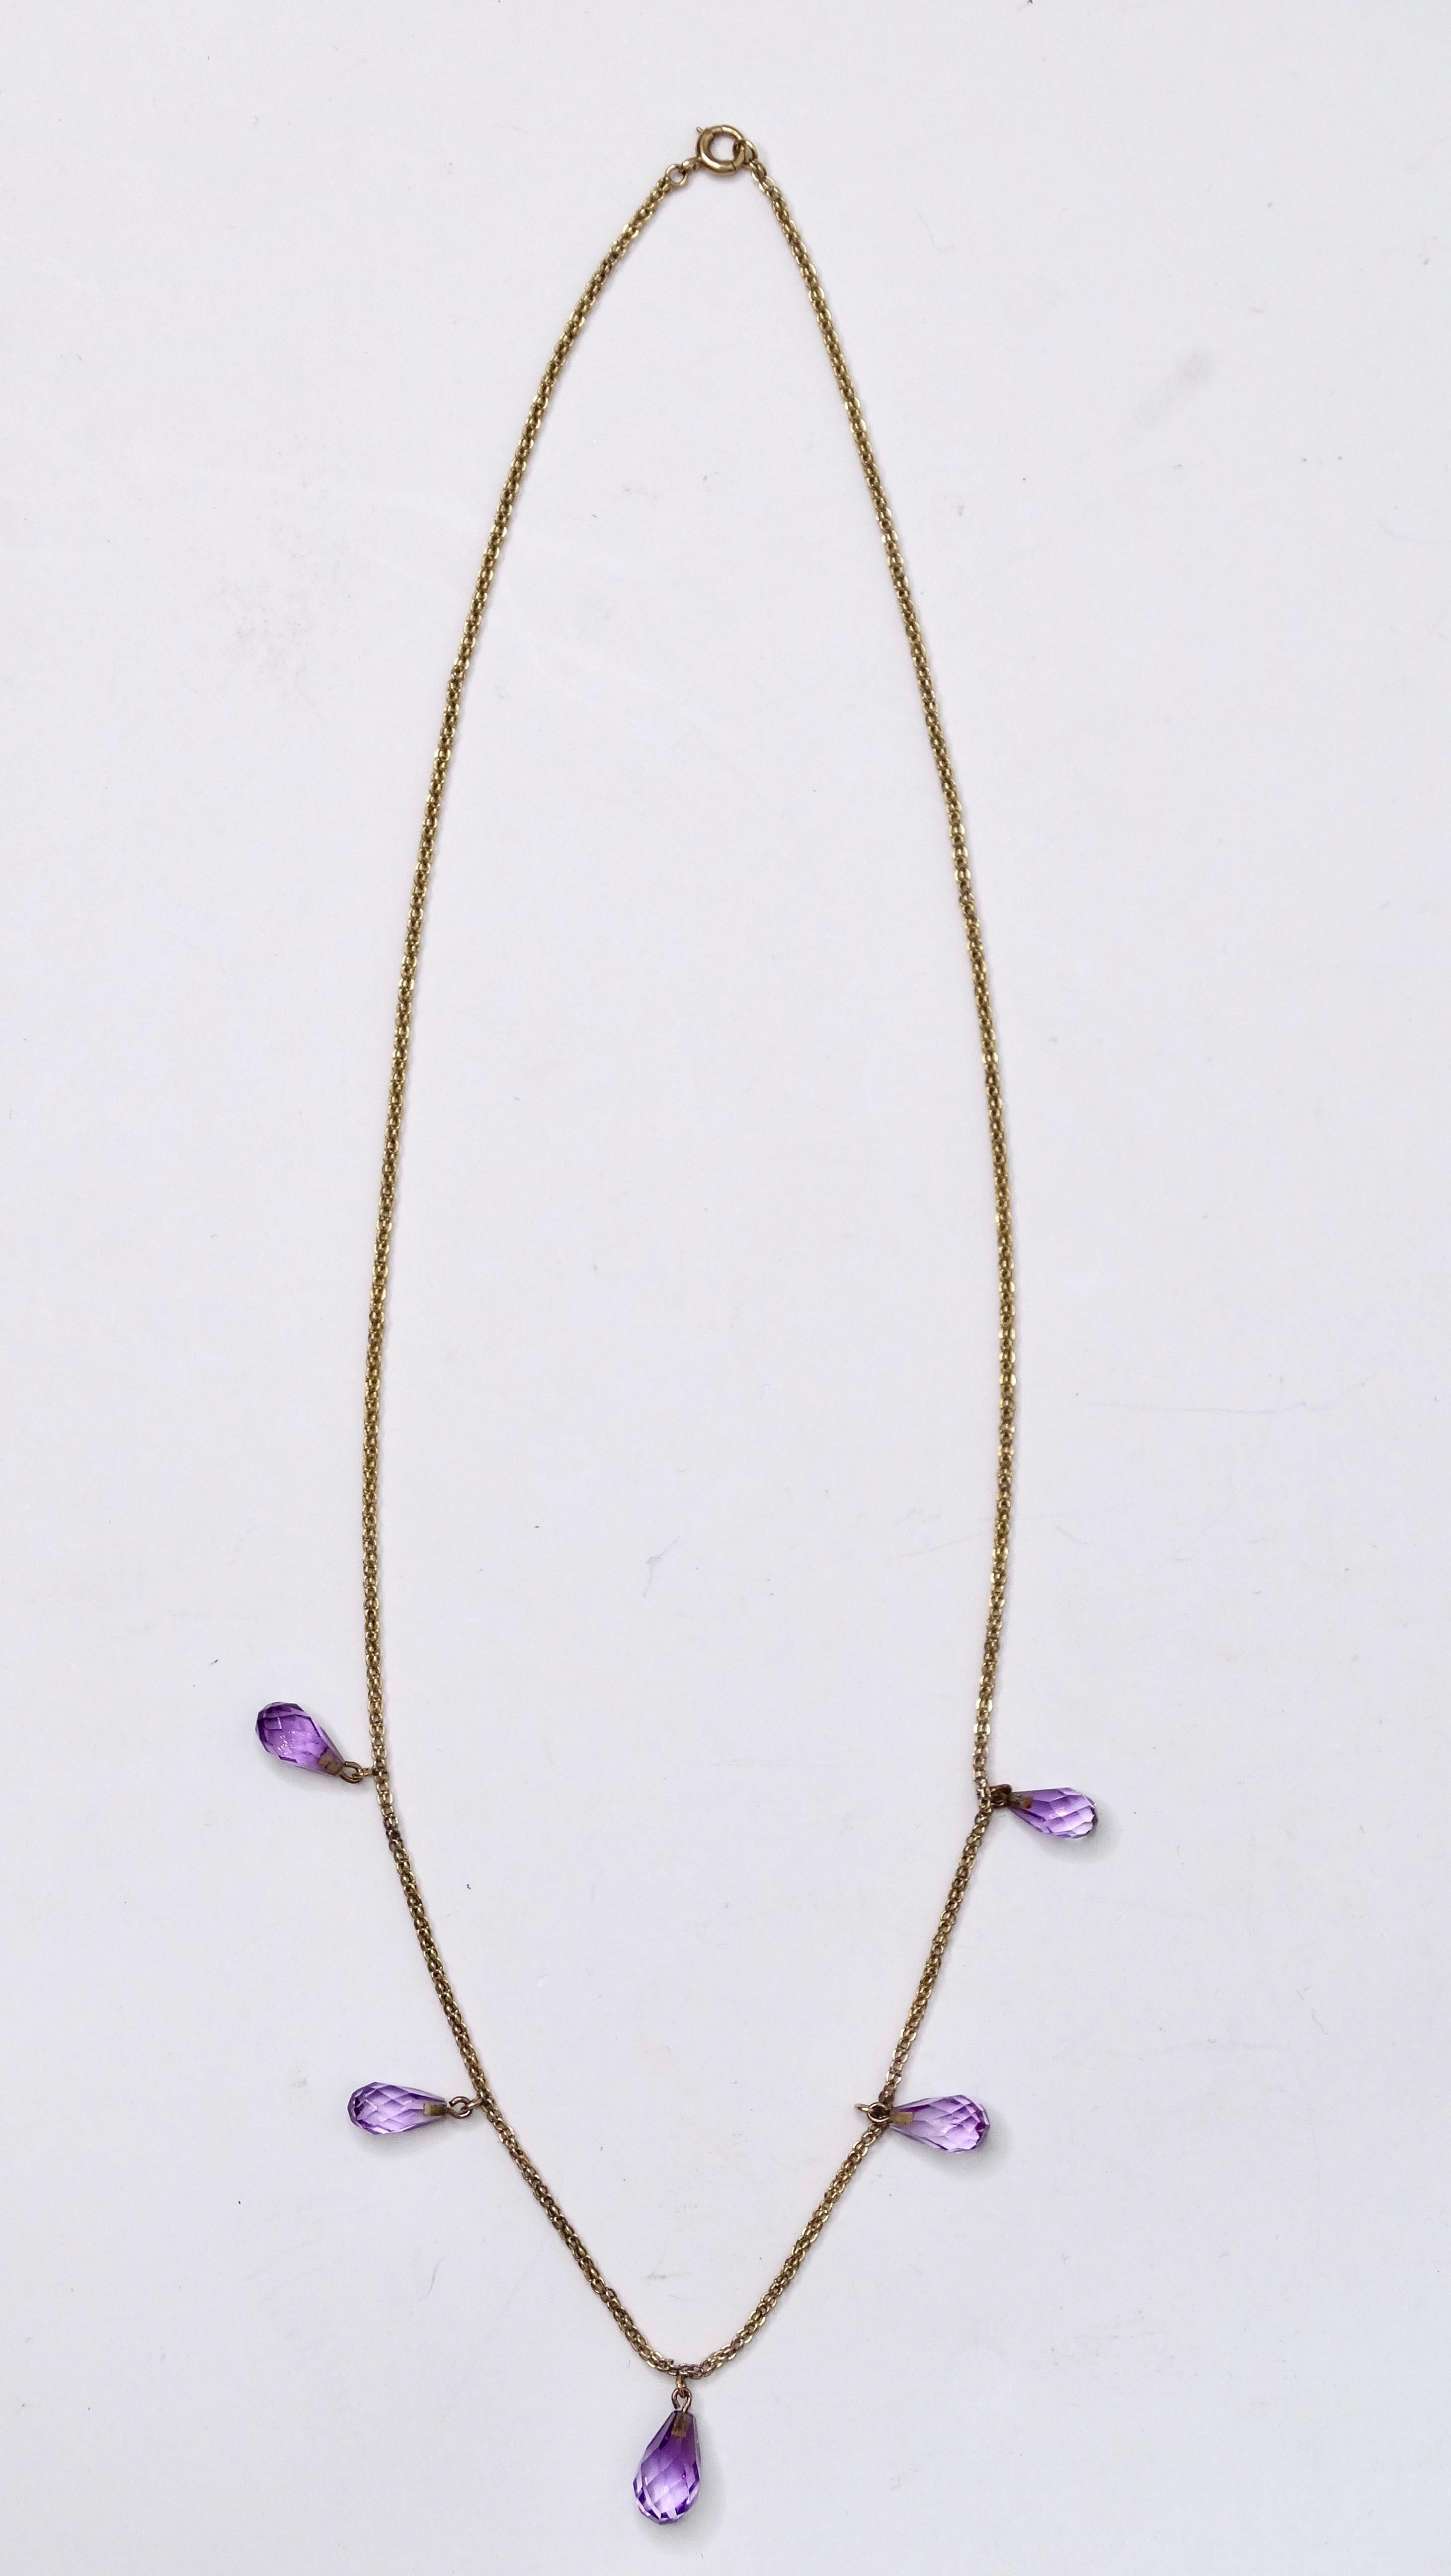 14k Gold and Amethyst Teardrop Necklace For Sale 1